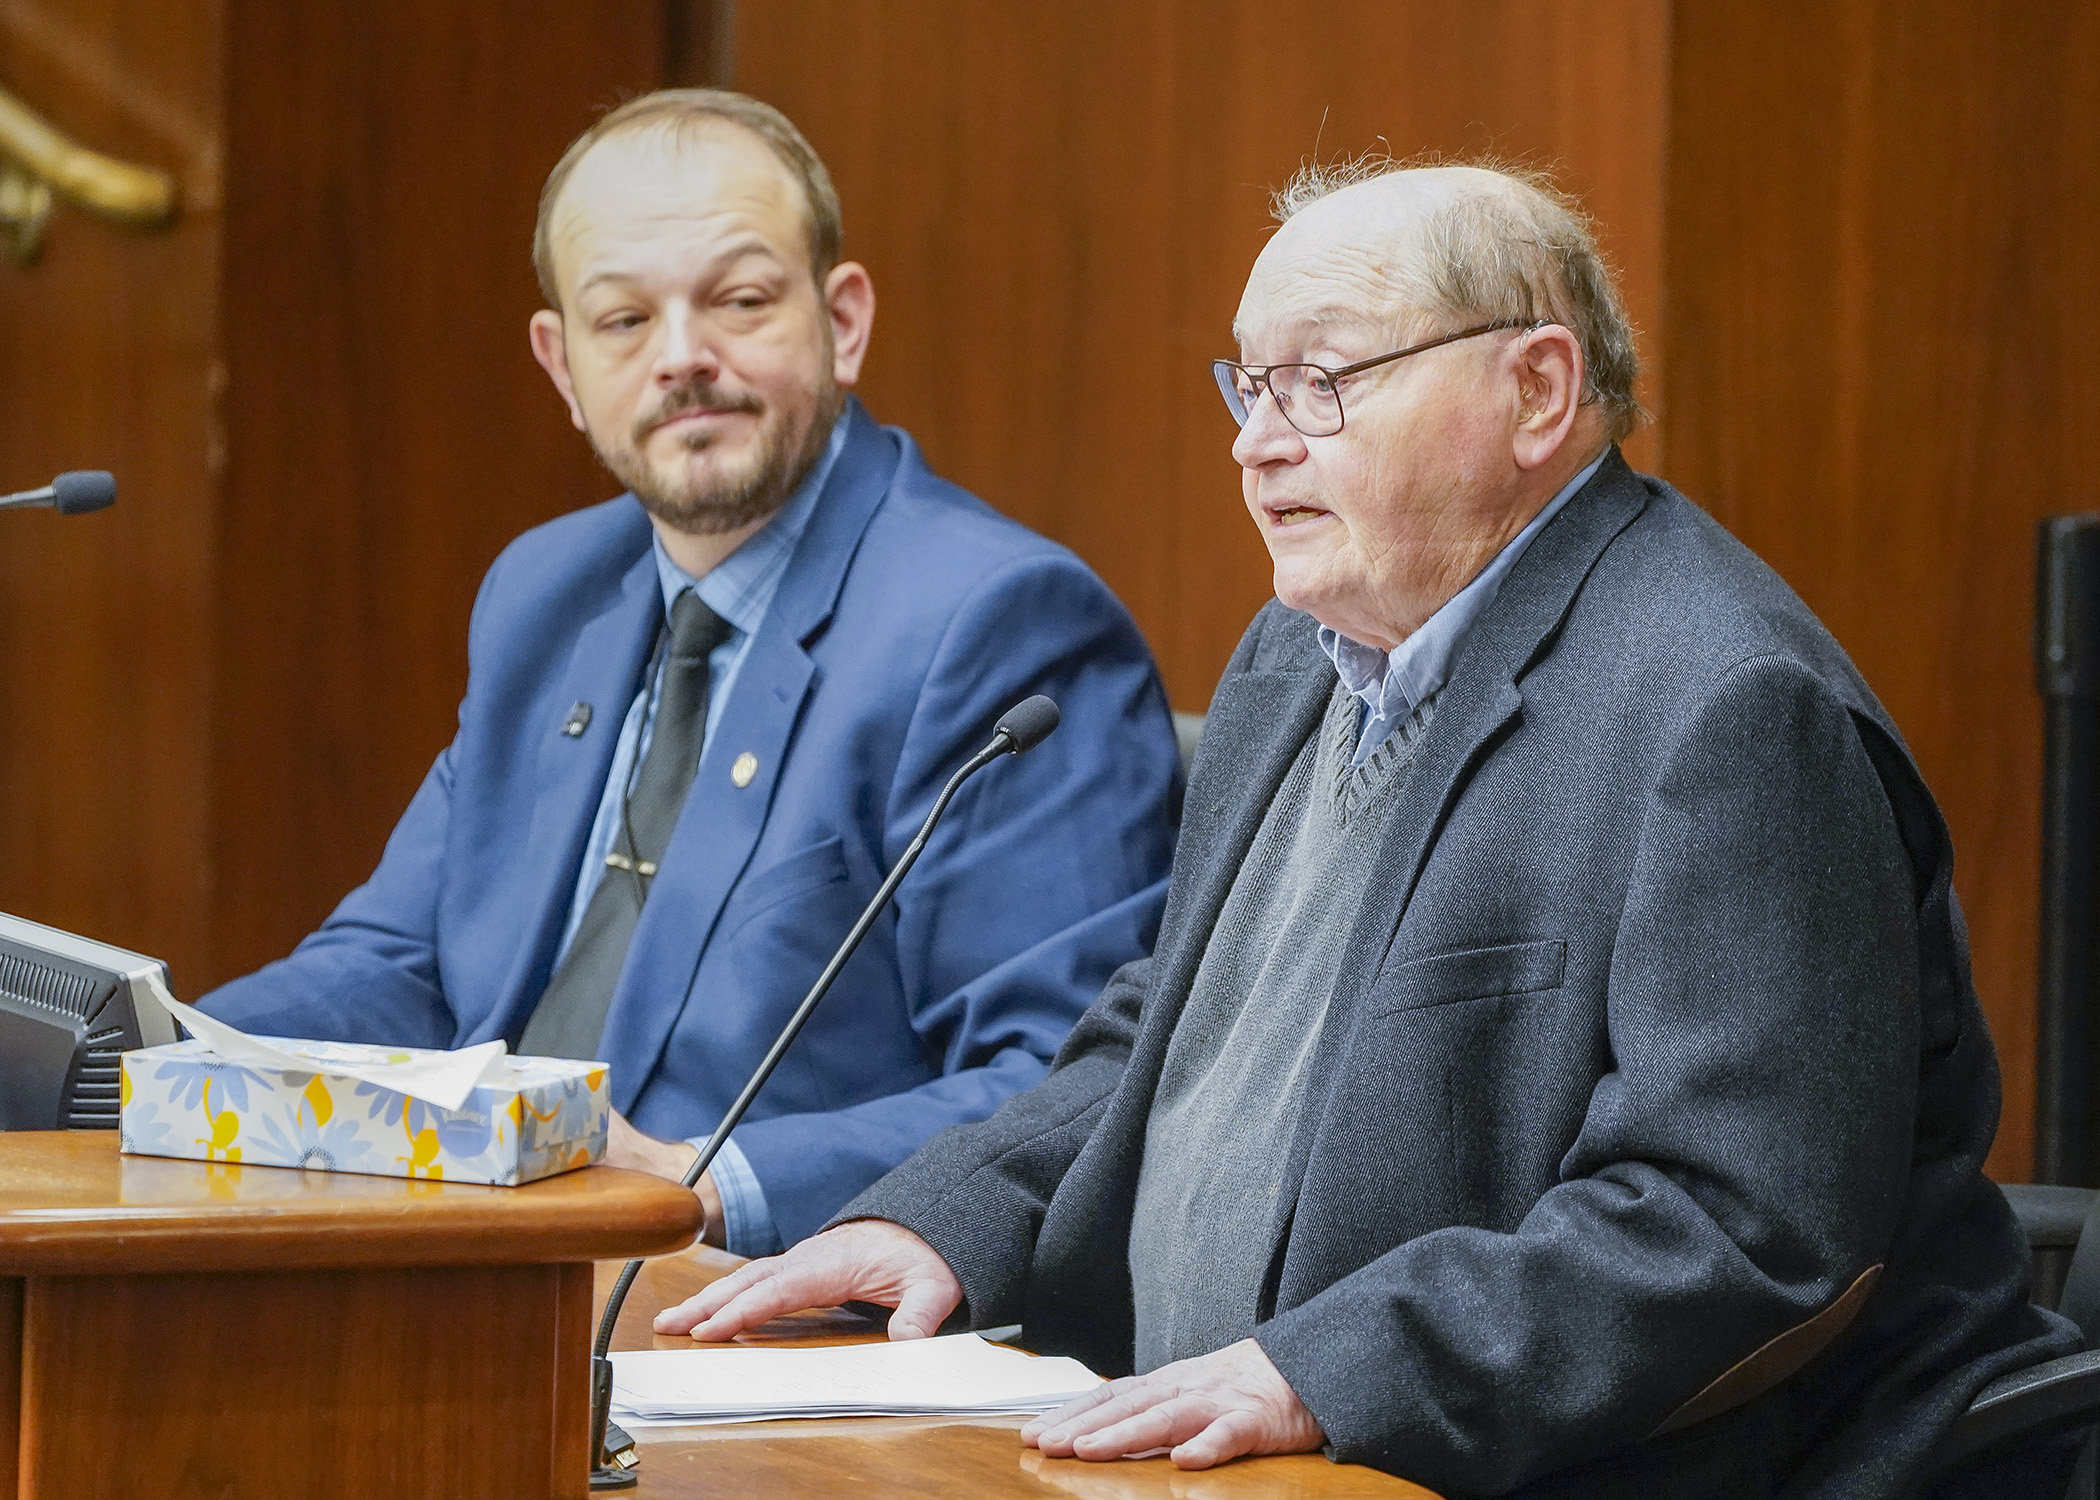 John Sherman testifies before the House Workforce Development Finance and Policy Committee March 8 in support of a bill sponsored by Rep. Jeff Brand, left, to provide rate increases for providers of extended employment services. (Photo by Andrew VonBank)